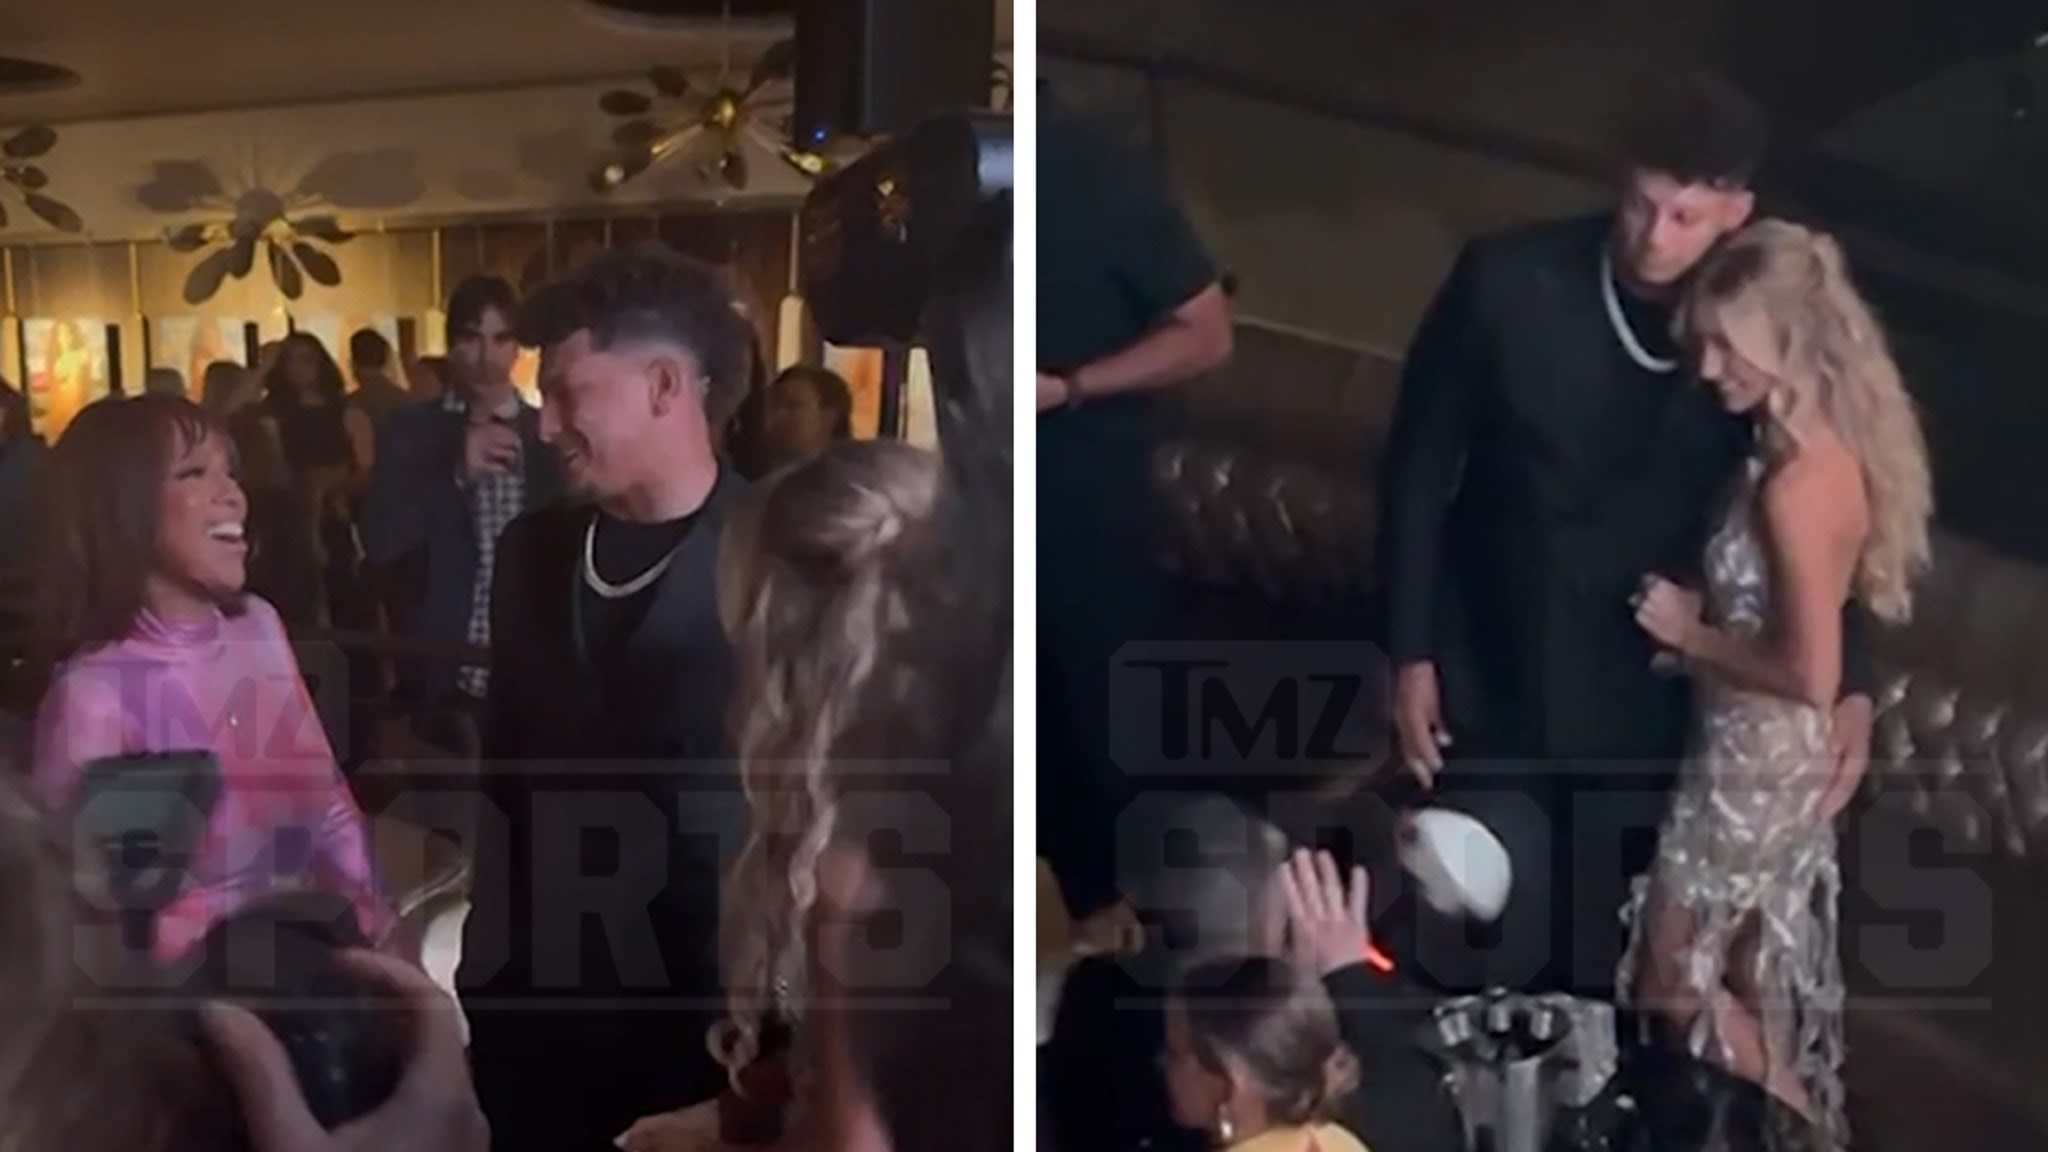 Patrick And Brittany Mahomes Jam To Taylor Swift At S.I. Swimsuit Event